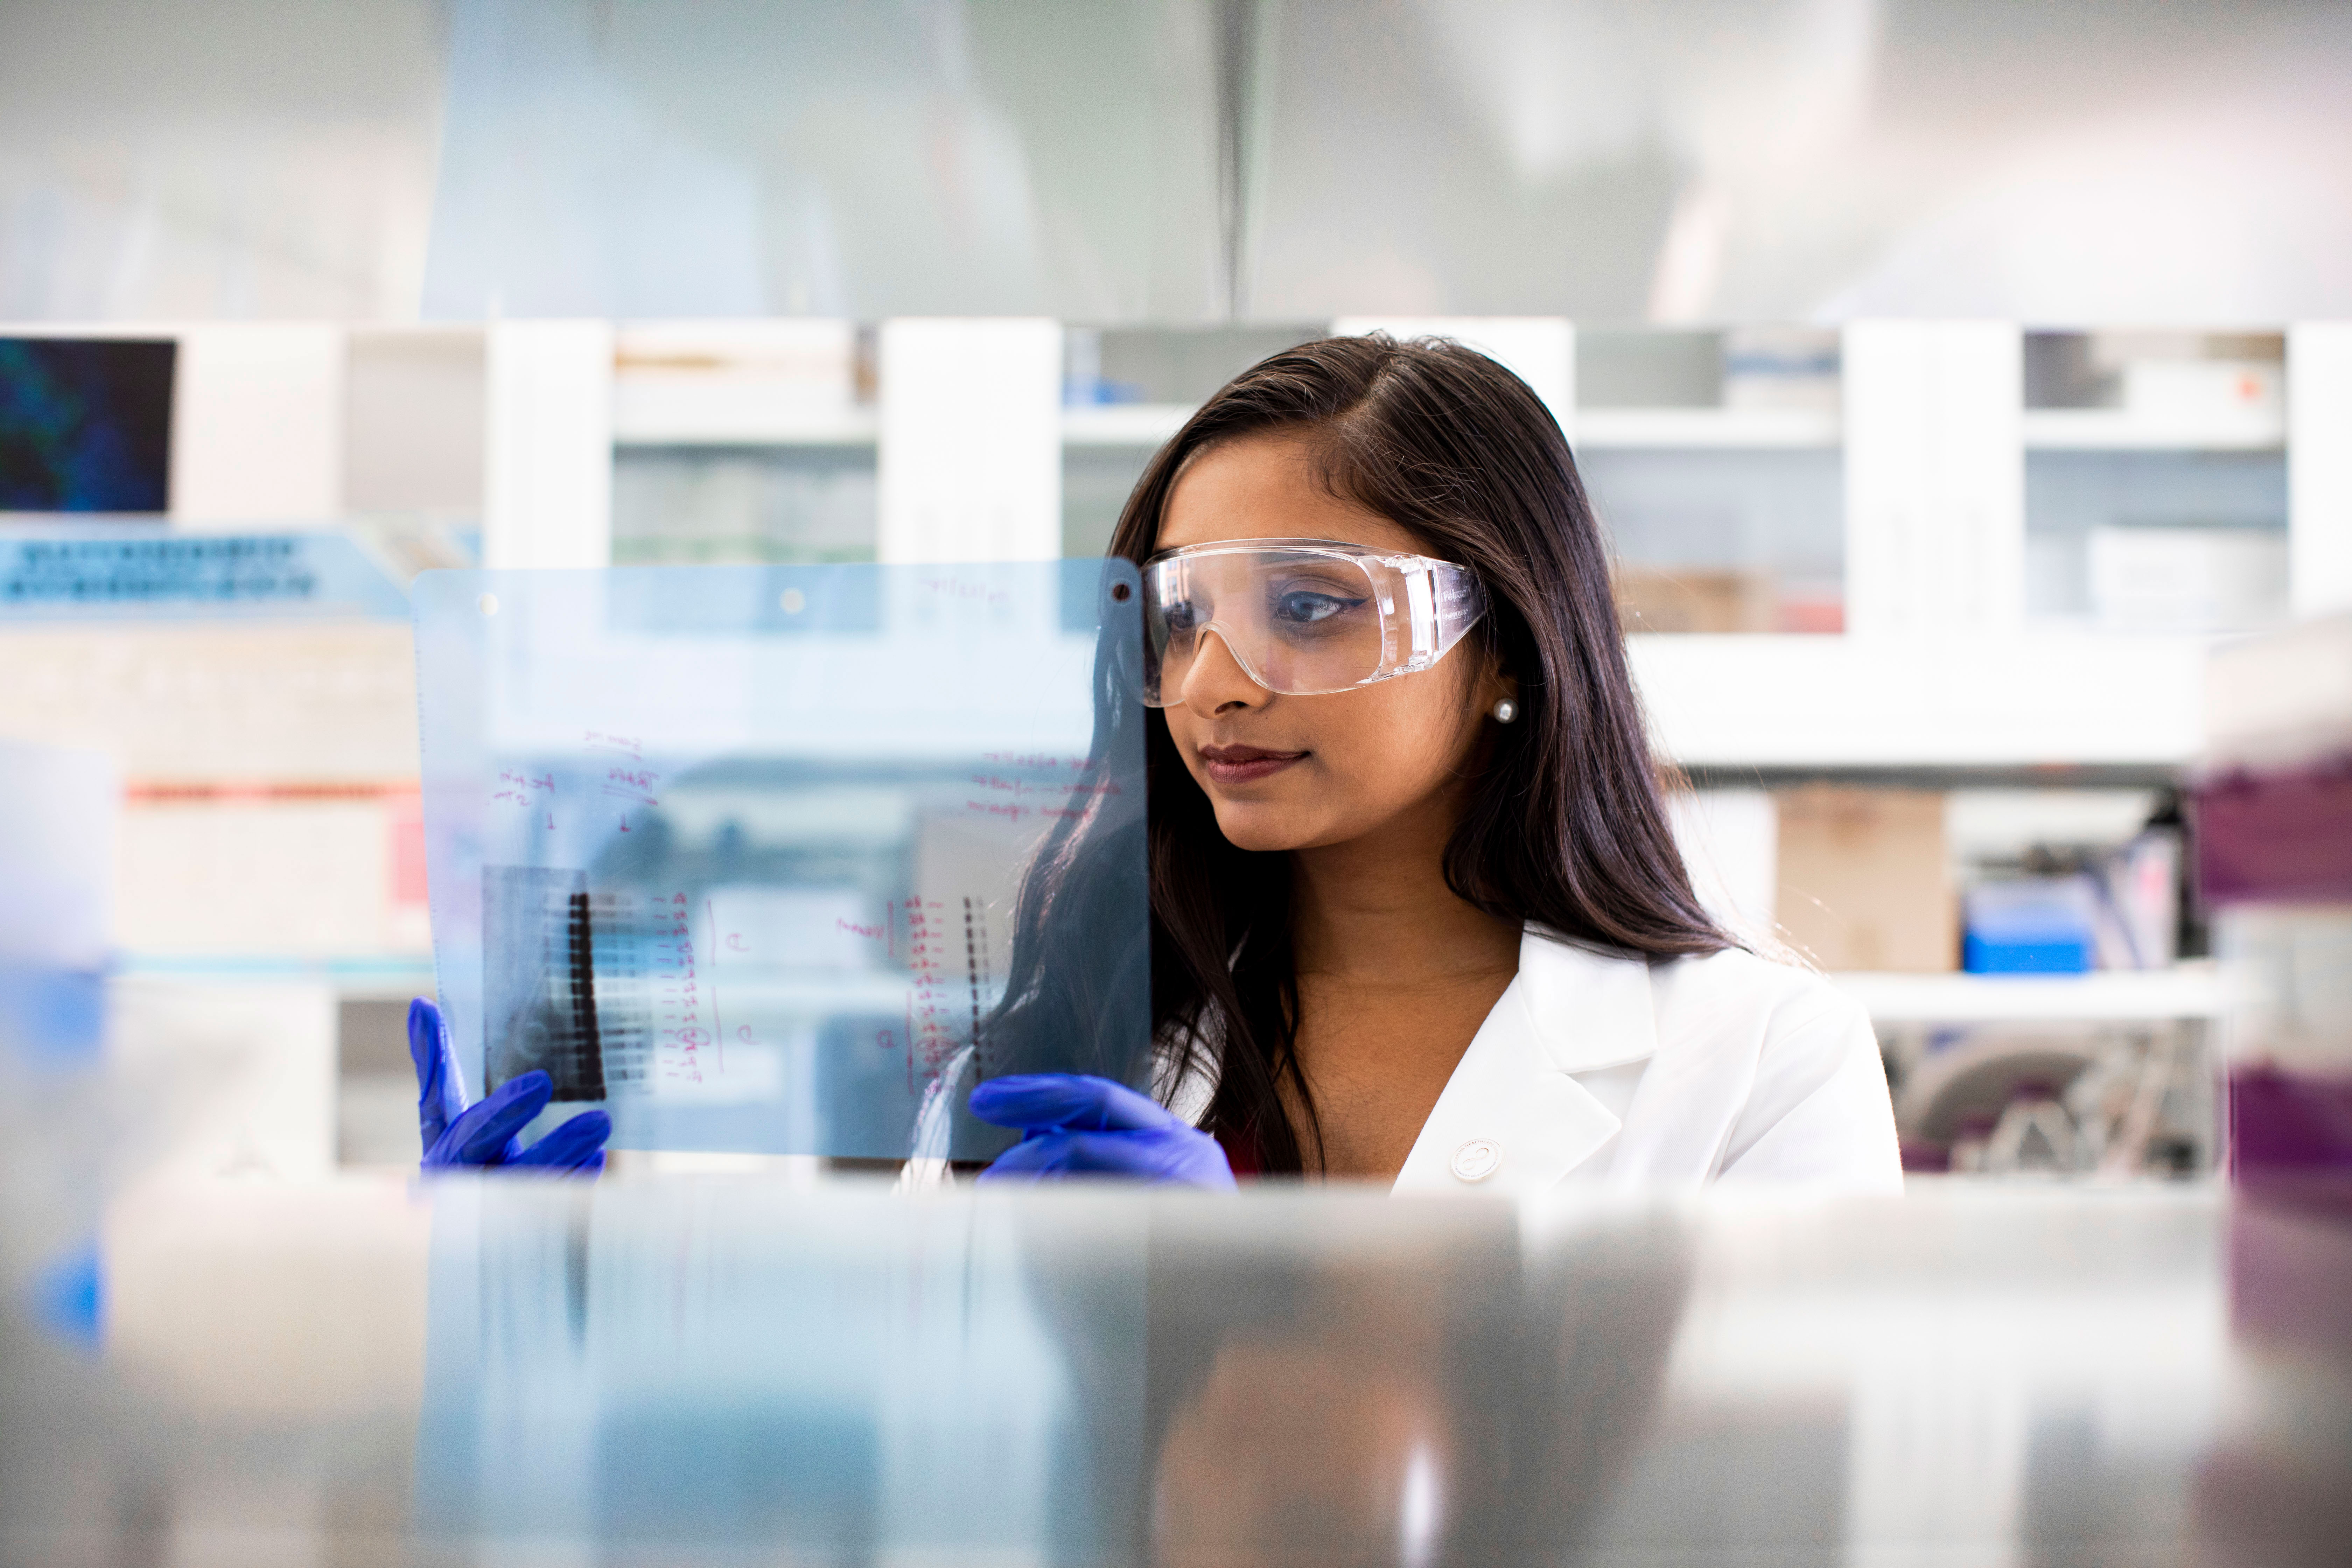 image of woman wearing white coat in lab setting 